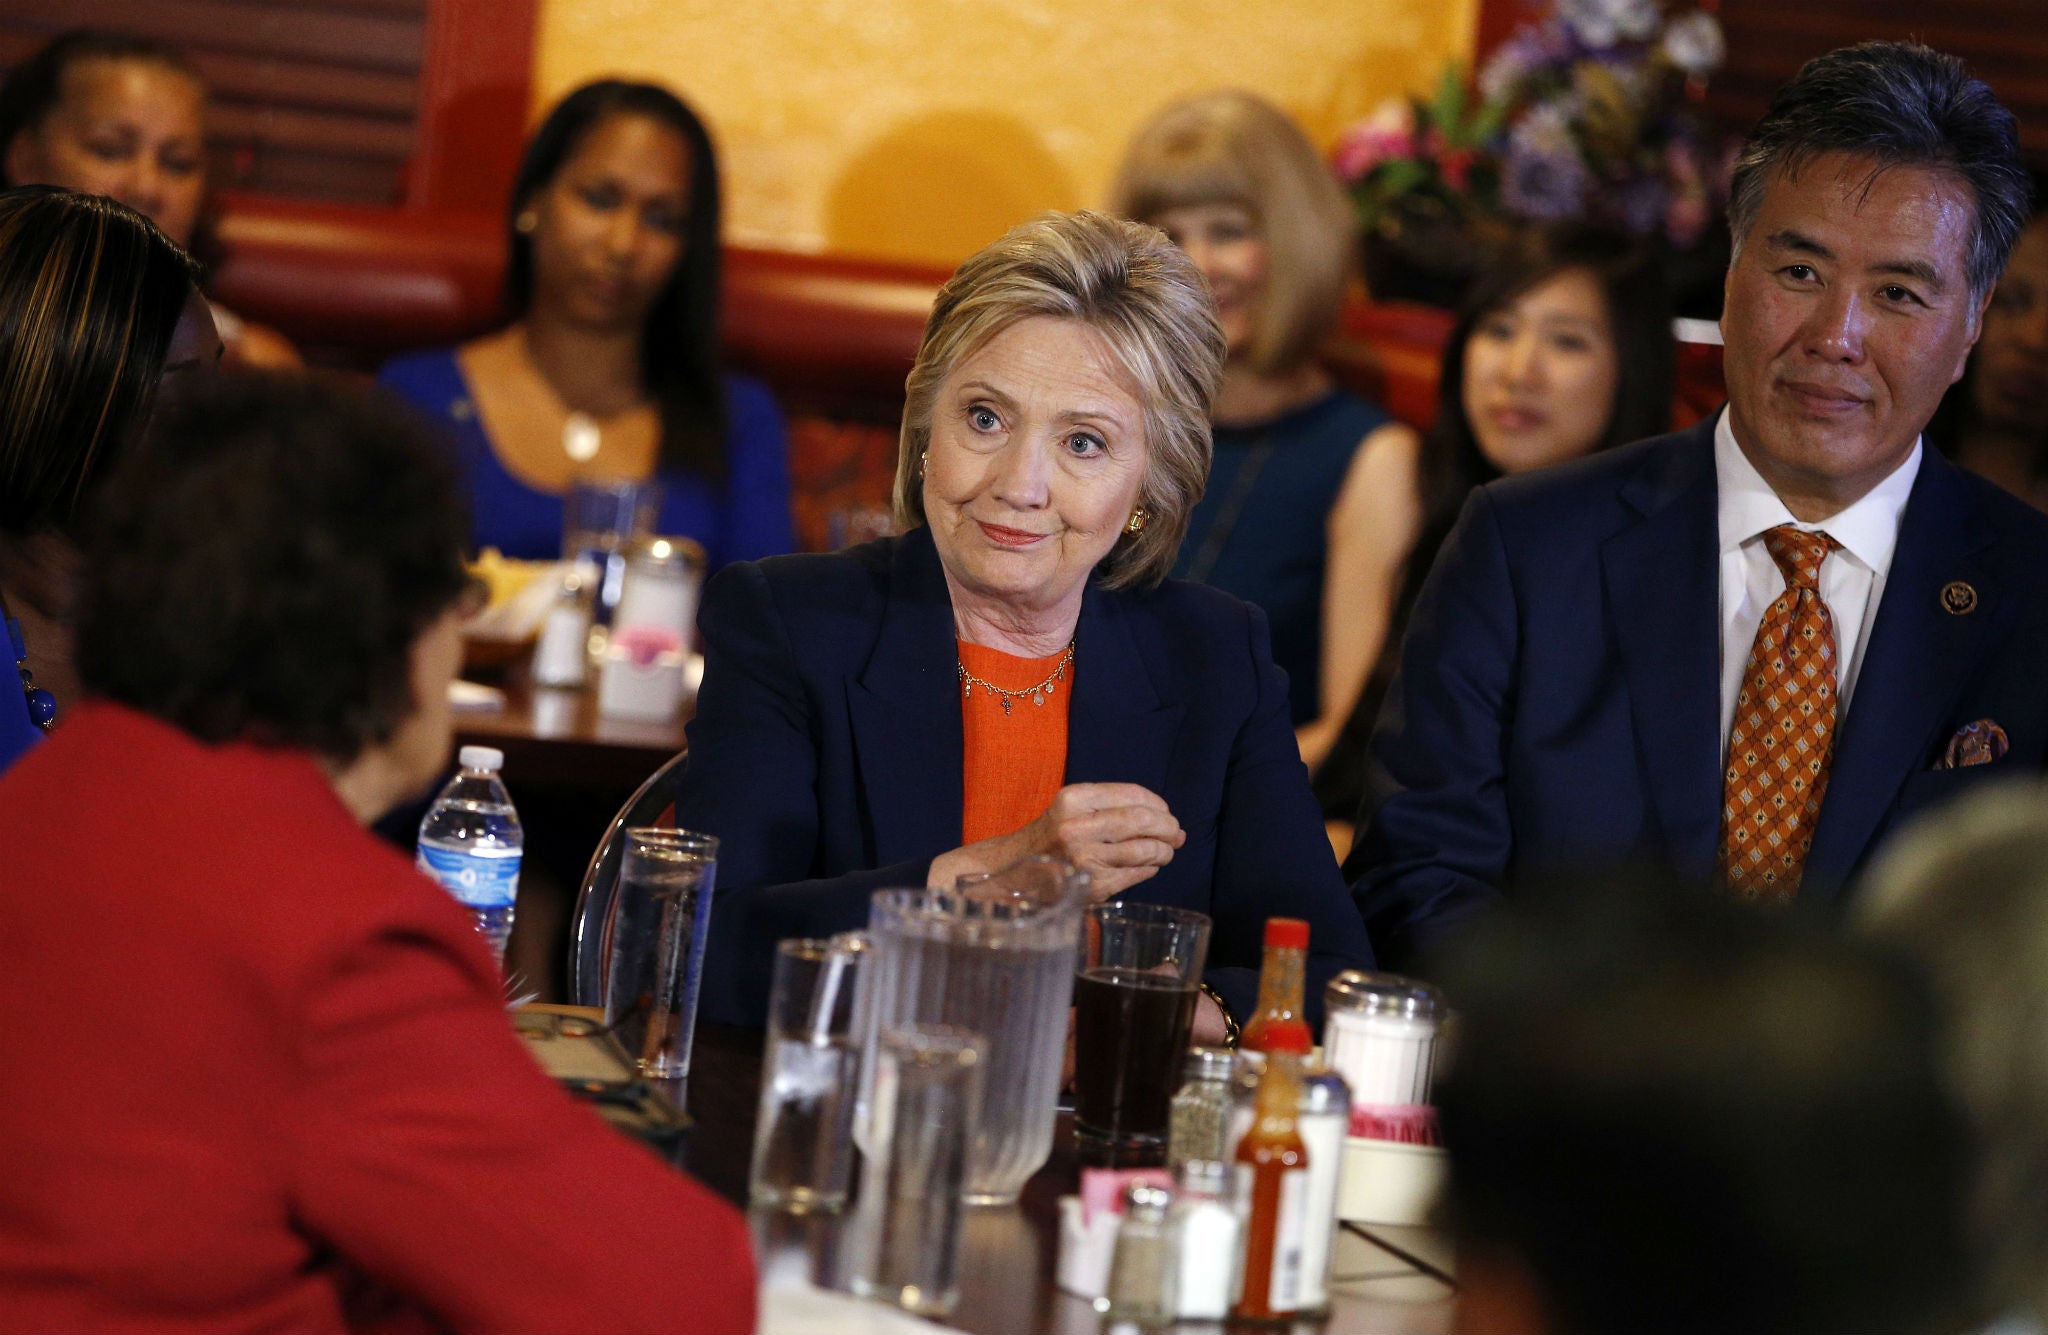 Hillary Clinton attends a campaign roundtable discussion in Perris, California on Thursday 2 June